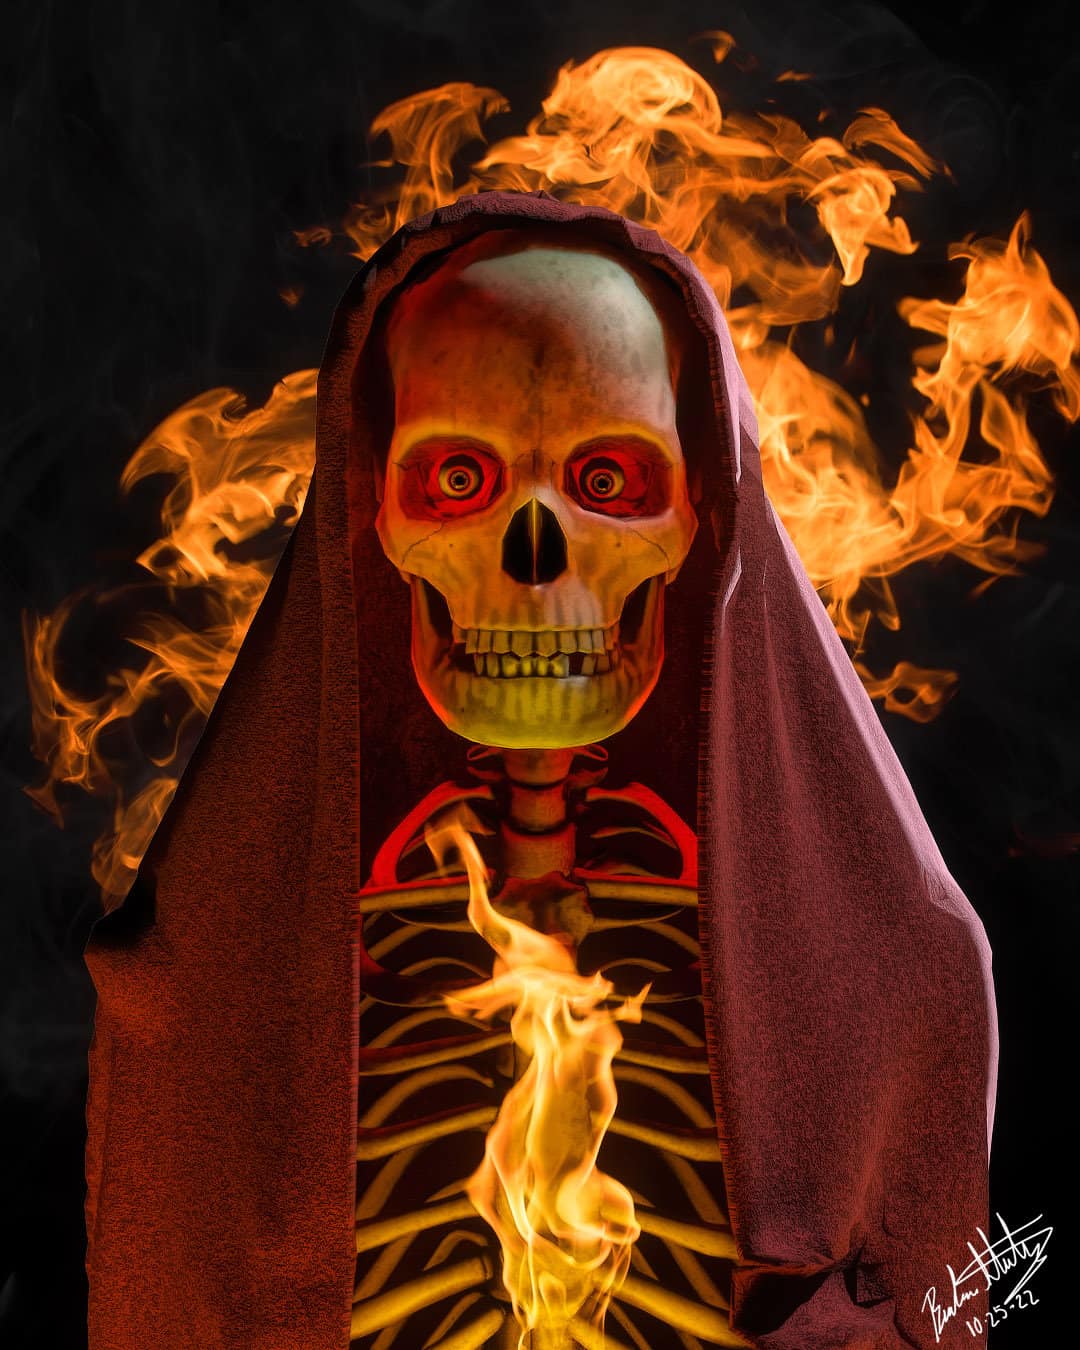 A skeleton with red cloth draped over him and fire in the background.